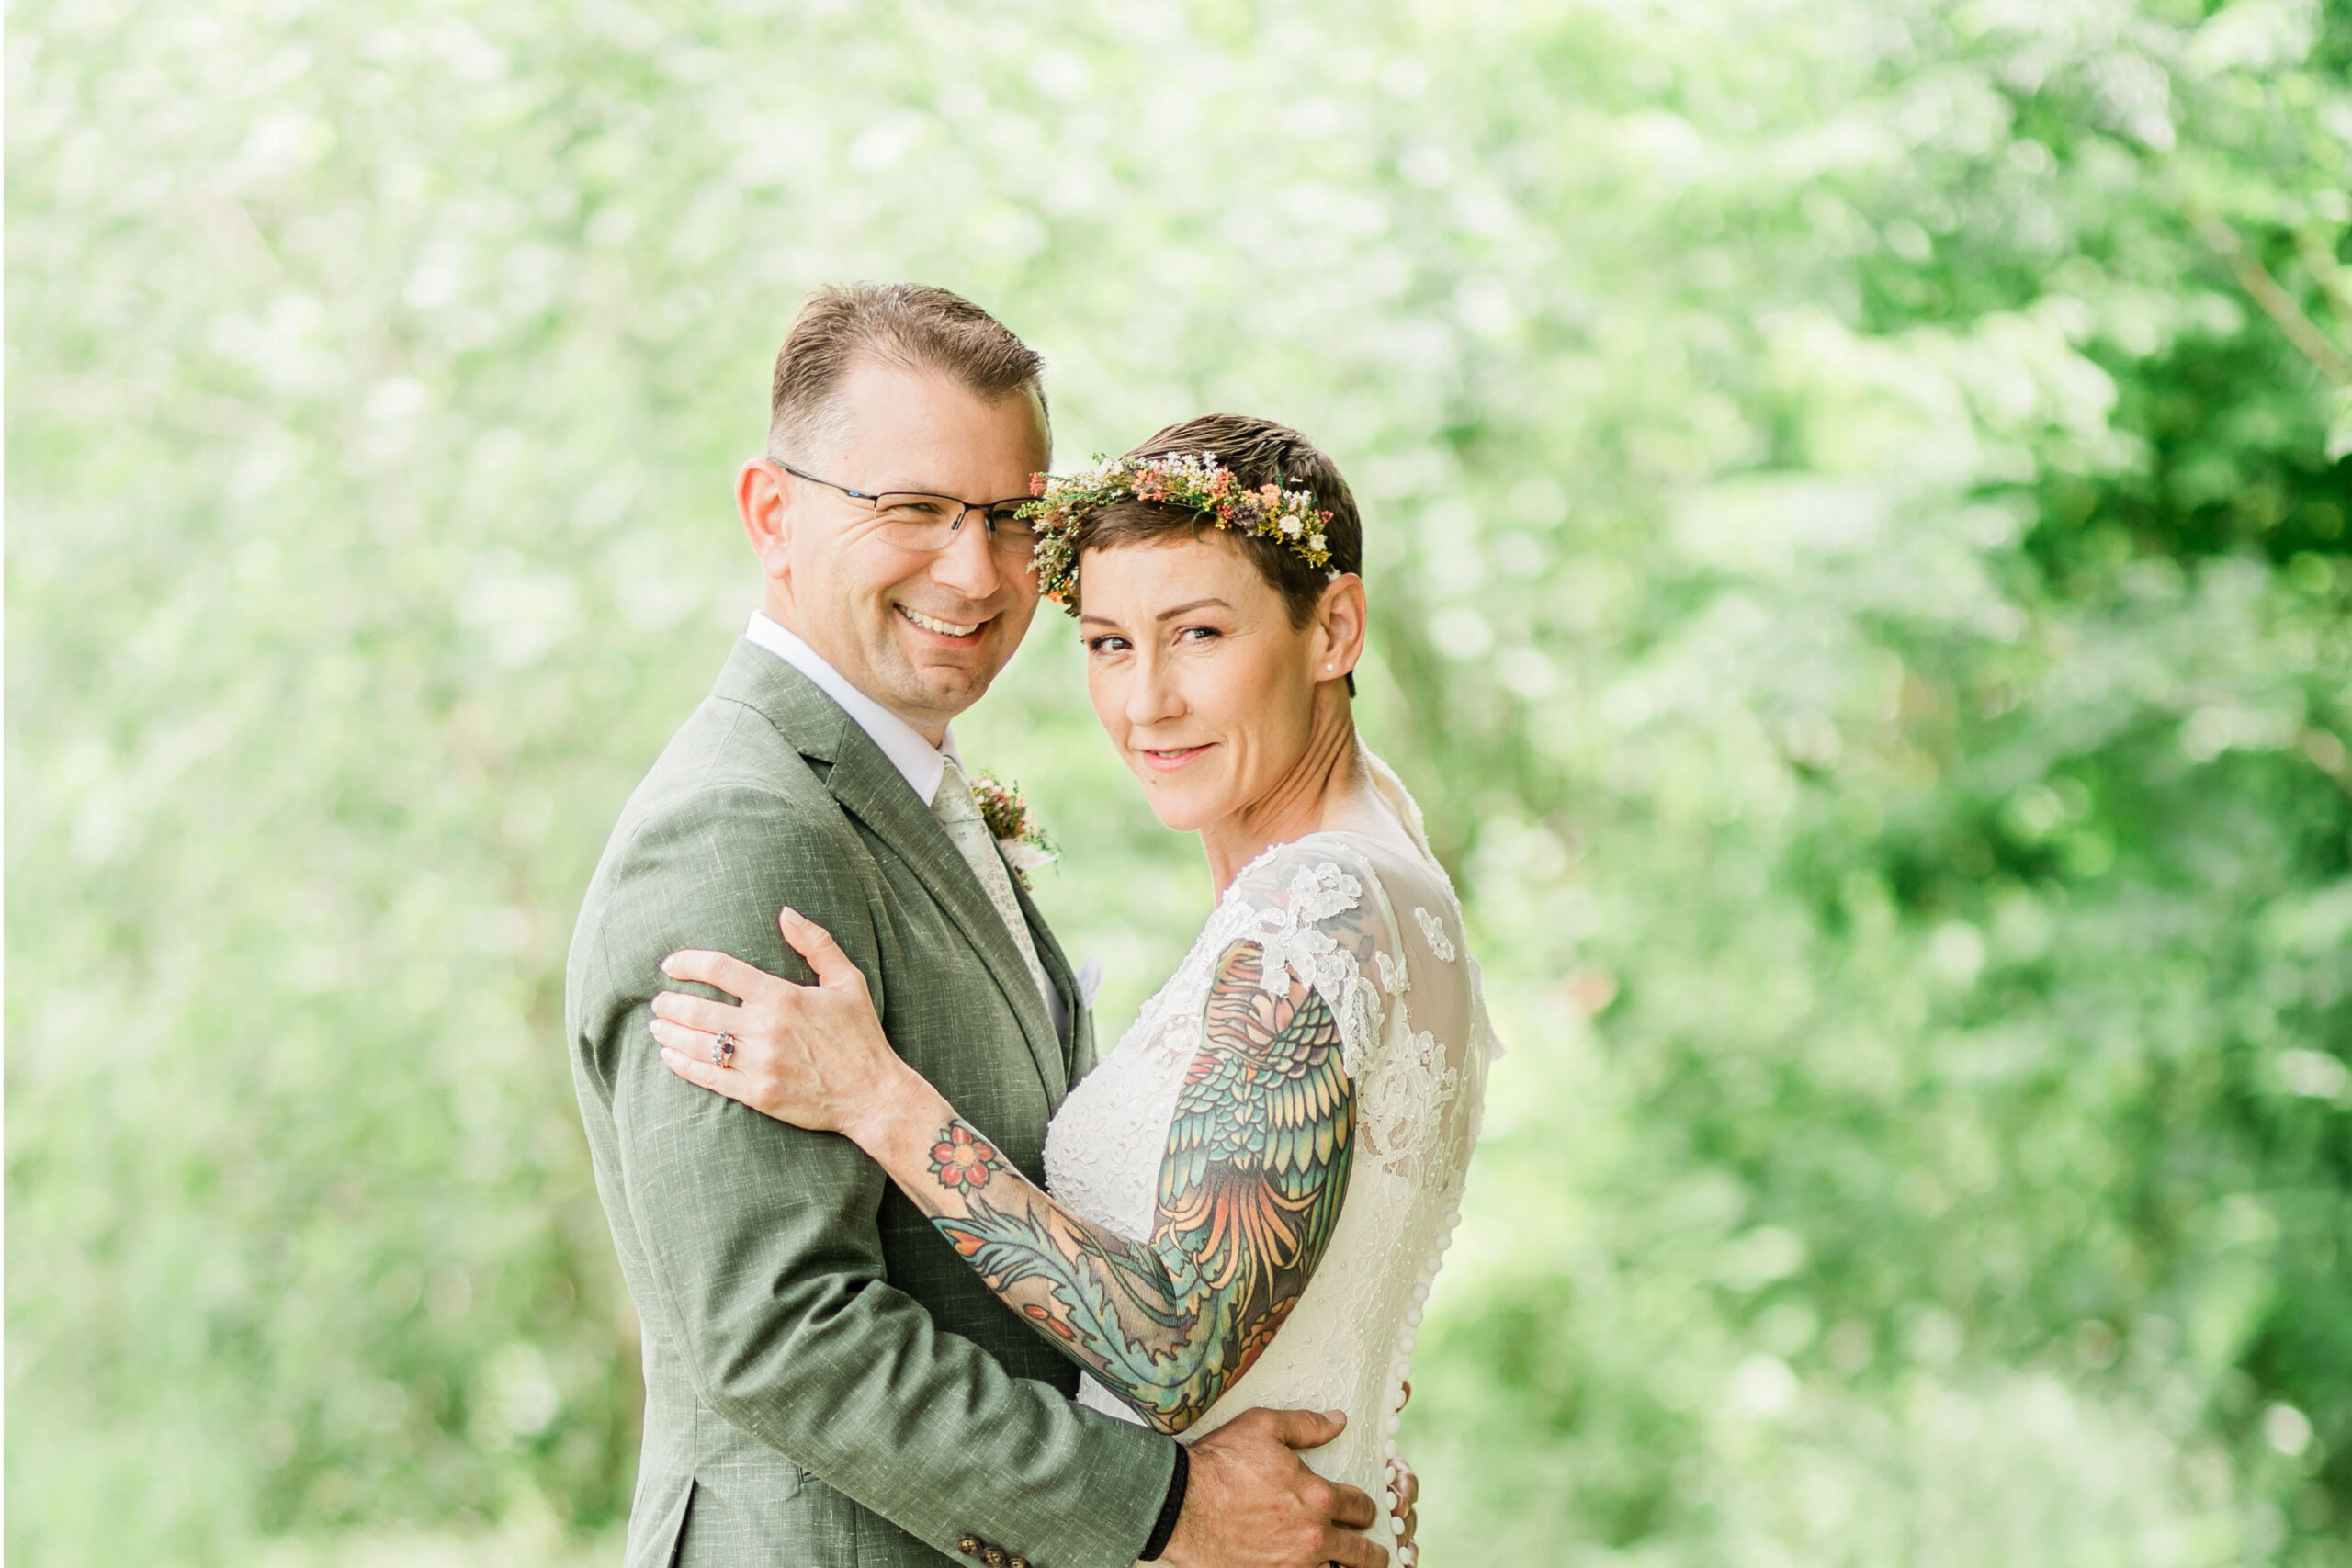 Bride and groom portrait in a lush green forest background.